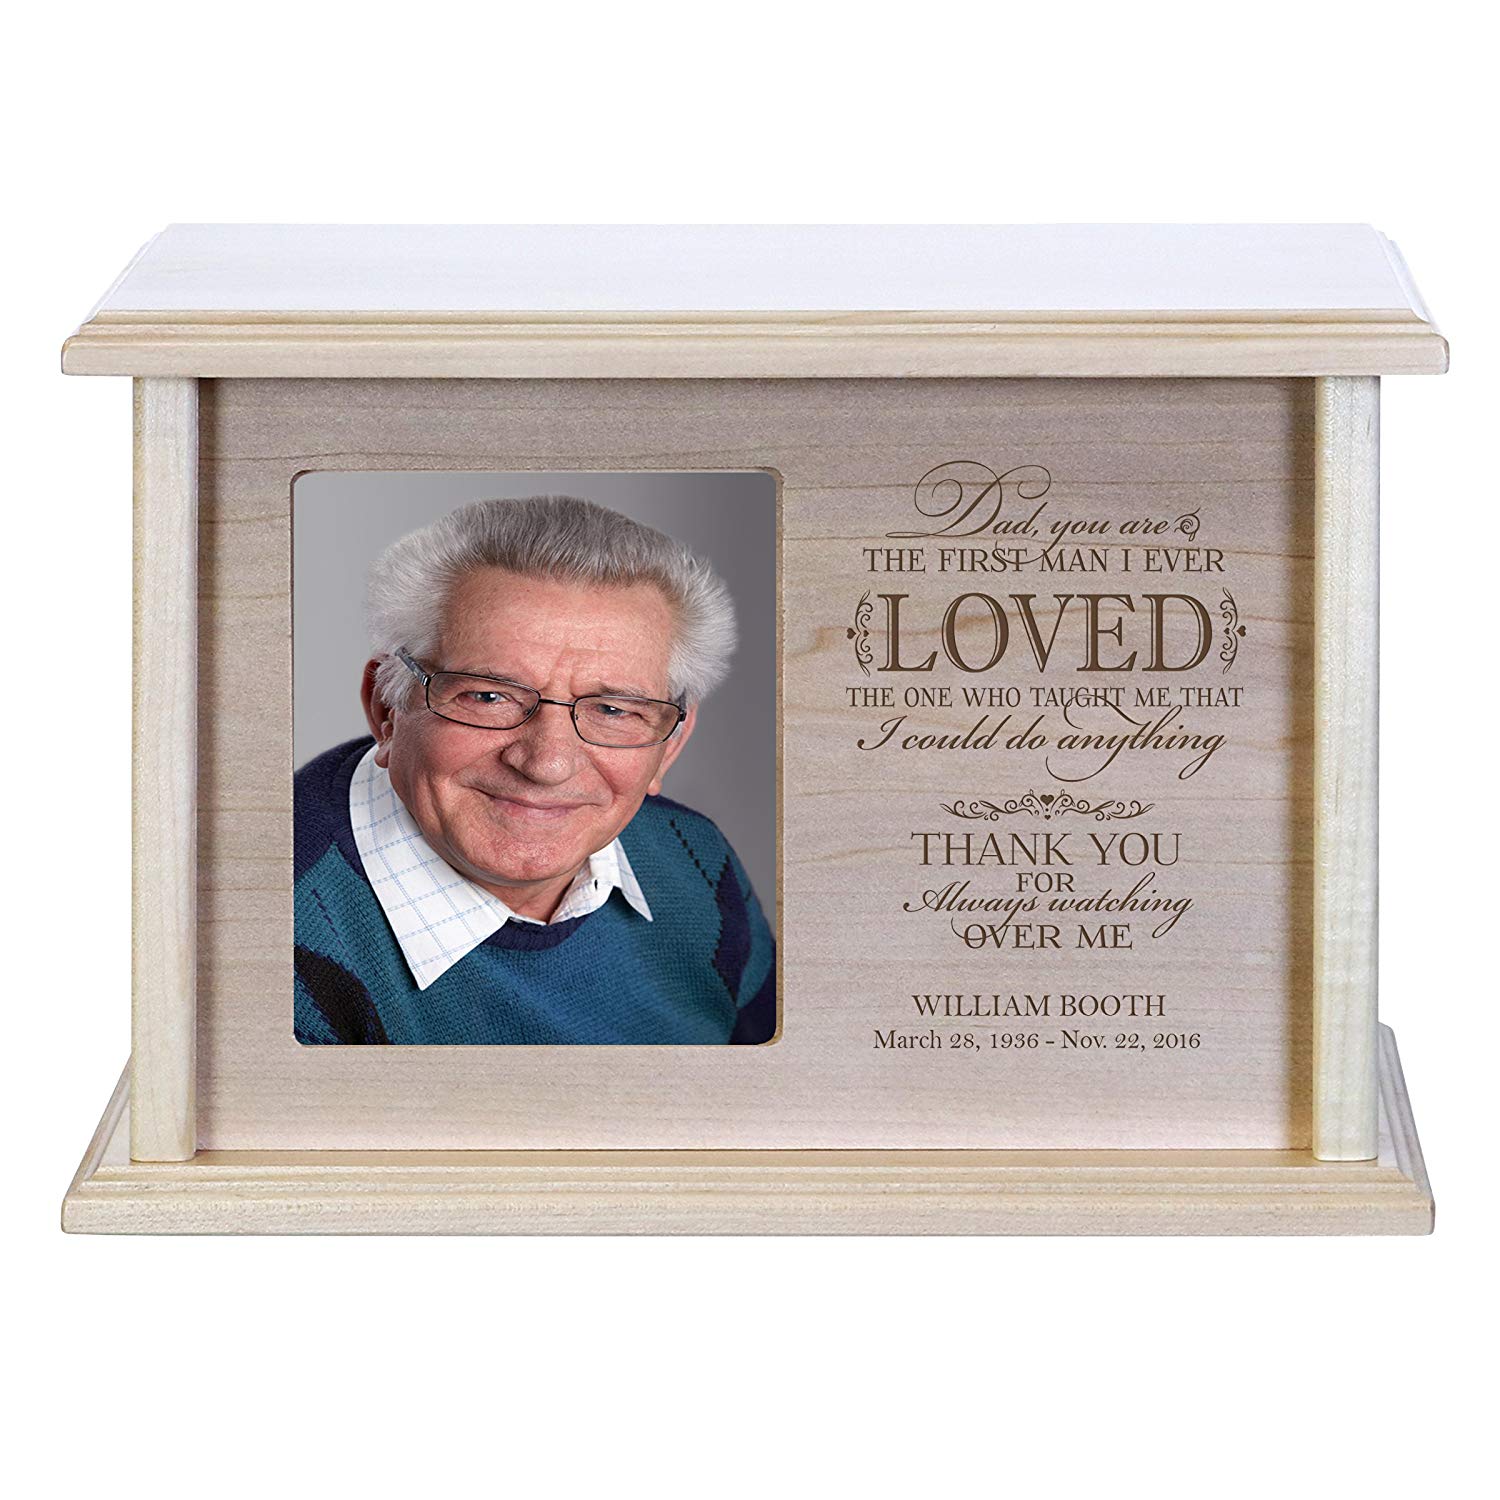 Custom Engraved Solid Wood Cremation Urn Box with 4x6 Photo holds 200 cu in of Human Ashes Dad You Are The First Man - LifeSong Milestones